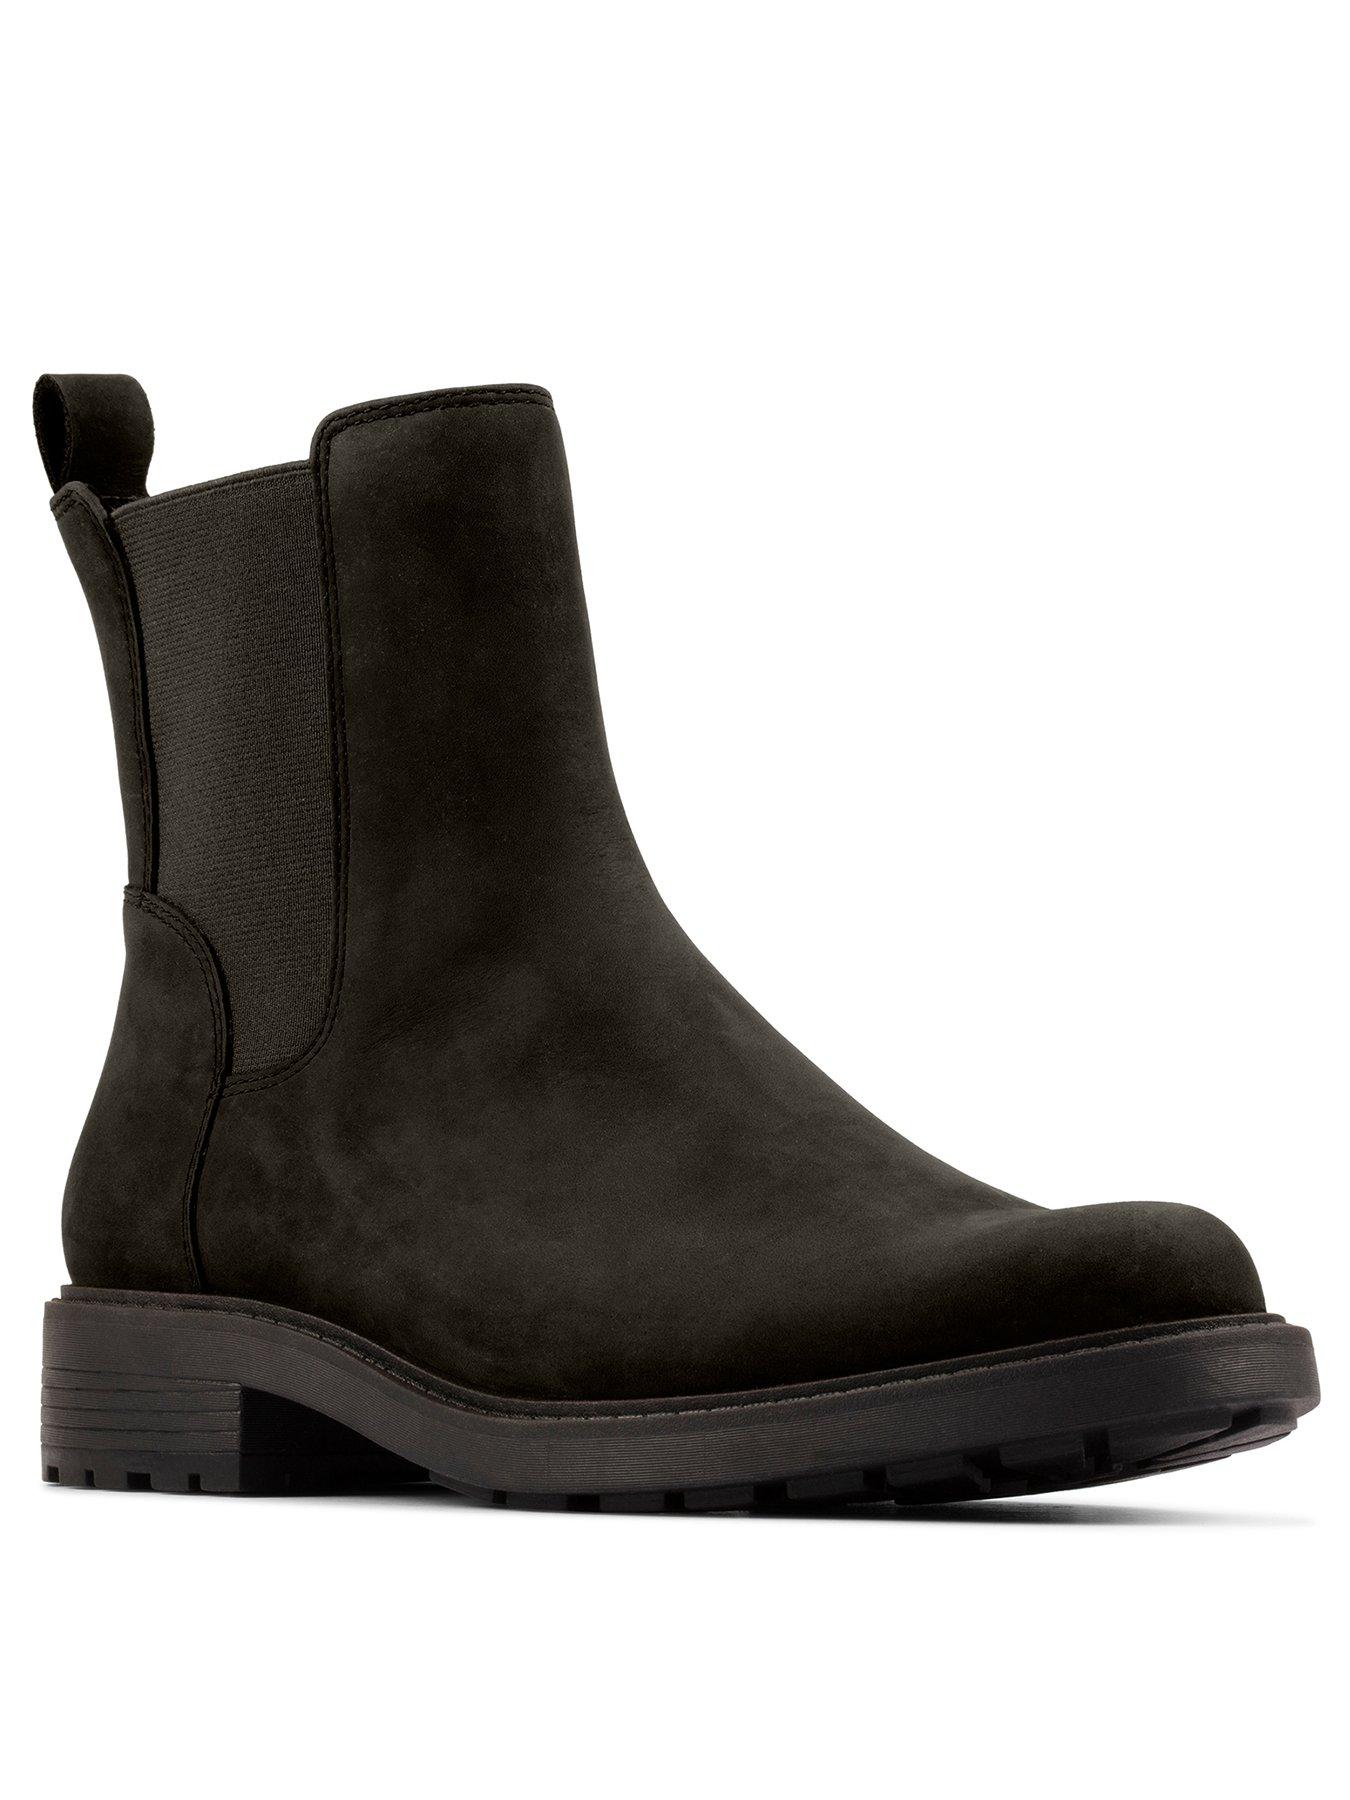 Clarks Boots | Clarks Womens Boots 